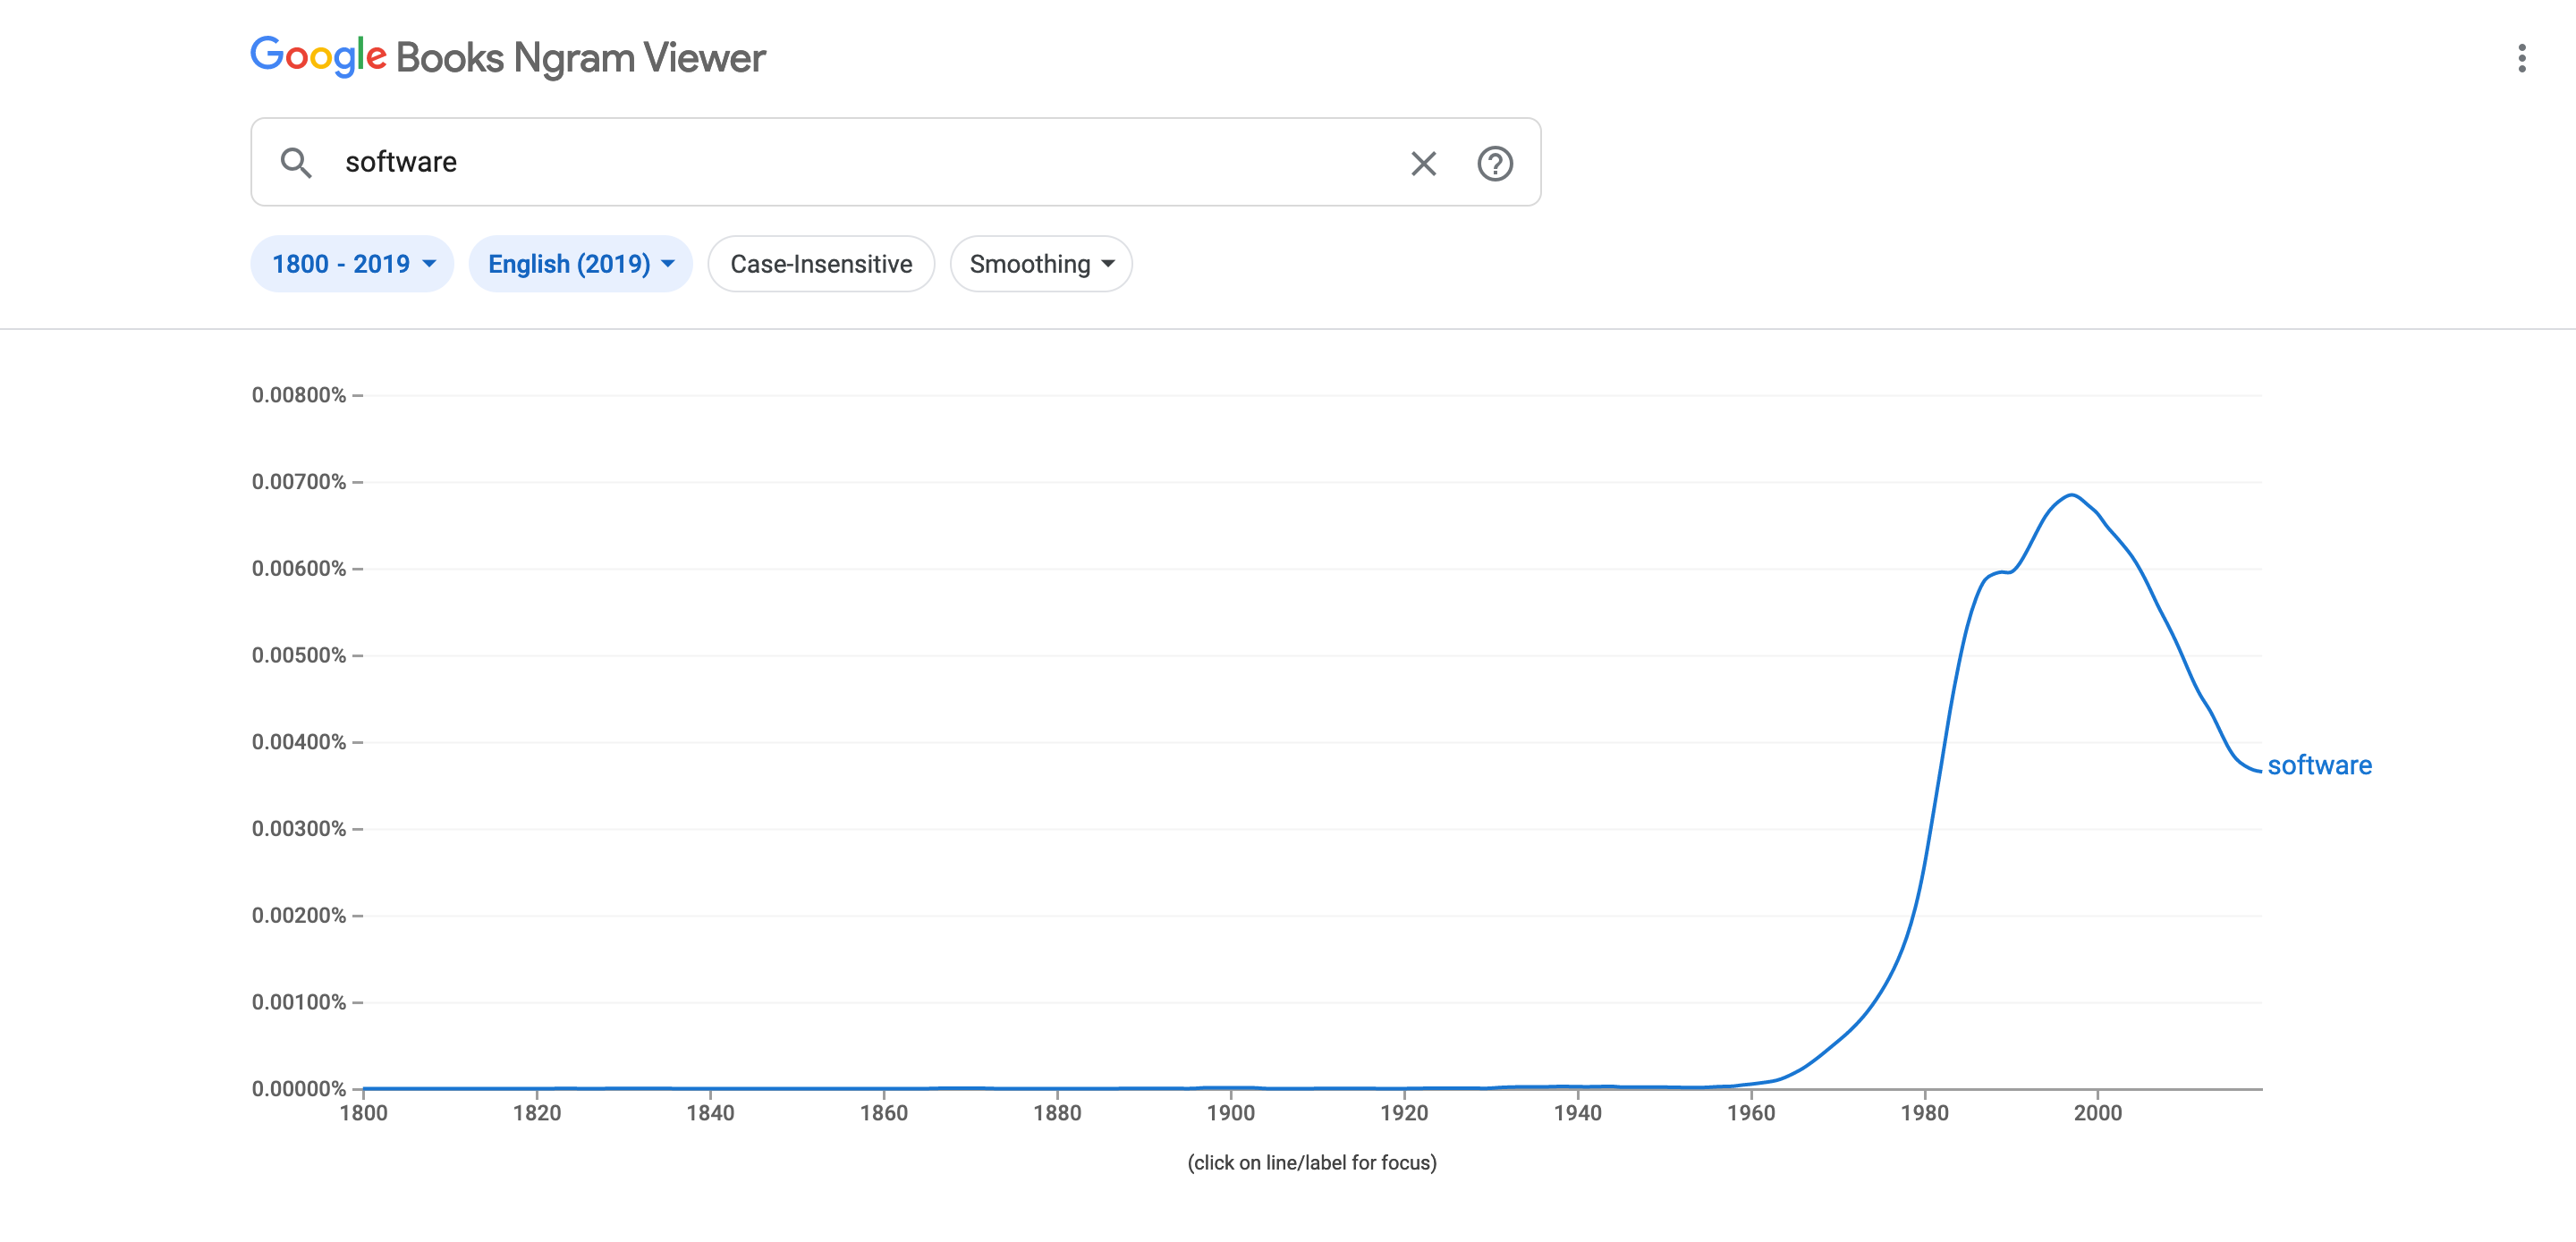 "A screenshot of a search result for the word software on Google Books Ngram Viewer. Image shows an upward rising graph in the 1960s, reaching its peak in the 2000s and falling downwards since then. It's an indication that the word software was most popular in books in the 2000s and is now losing its novelty."